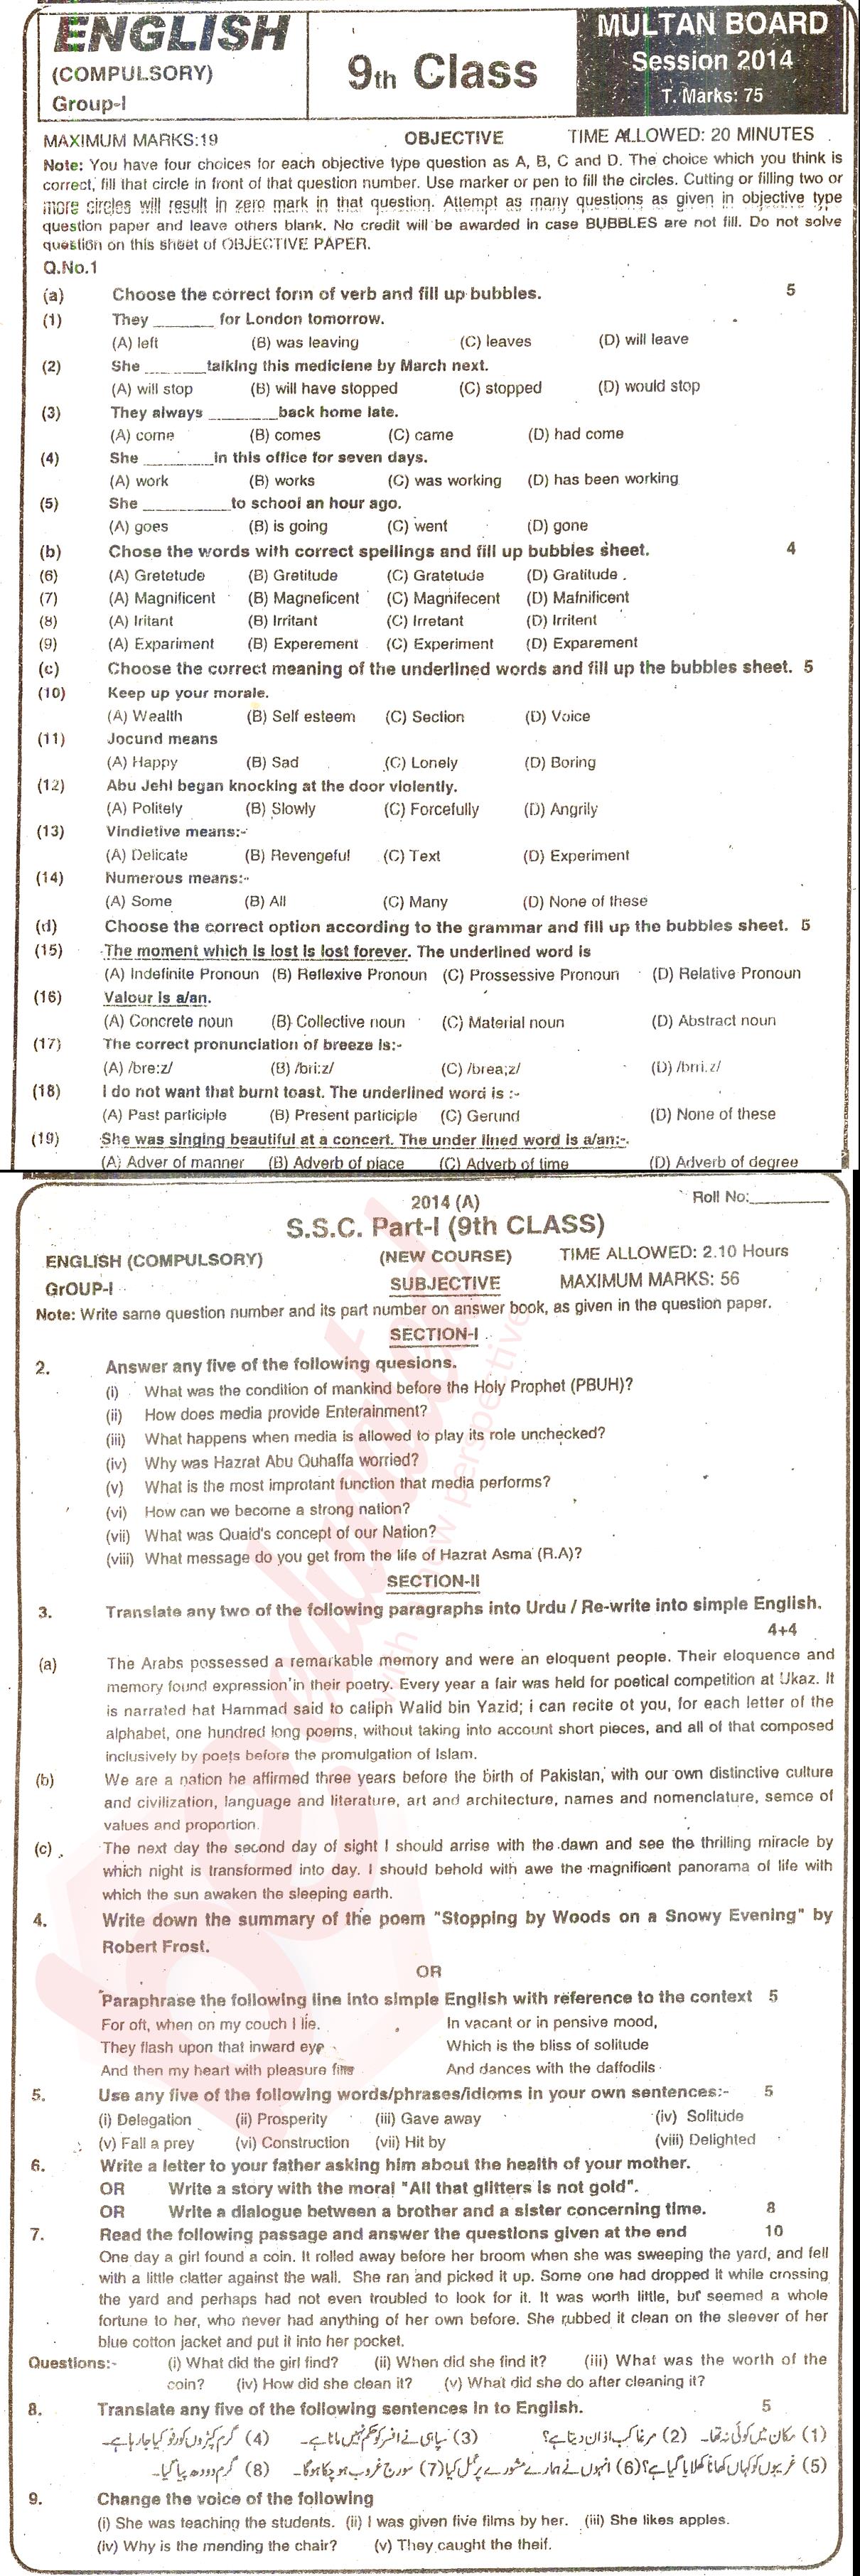 English 9th class Past Paper Group 1 BISE Multan 2014